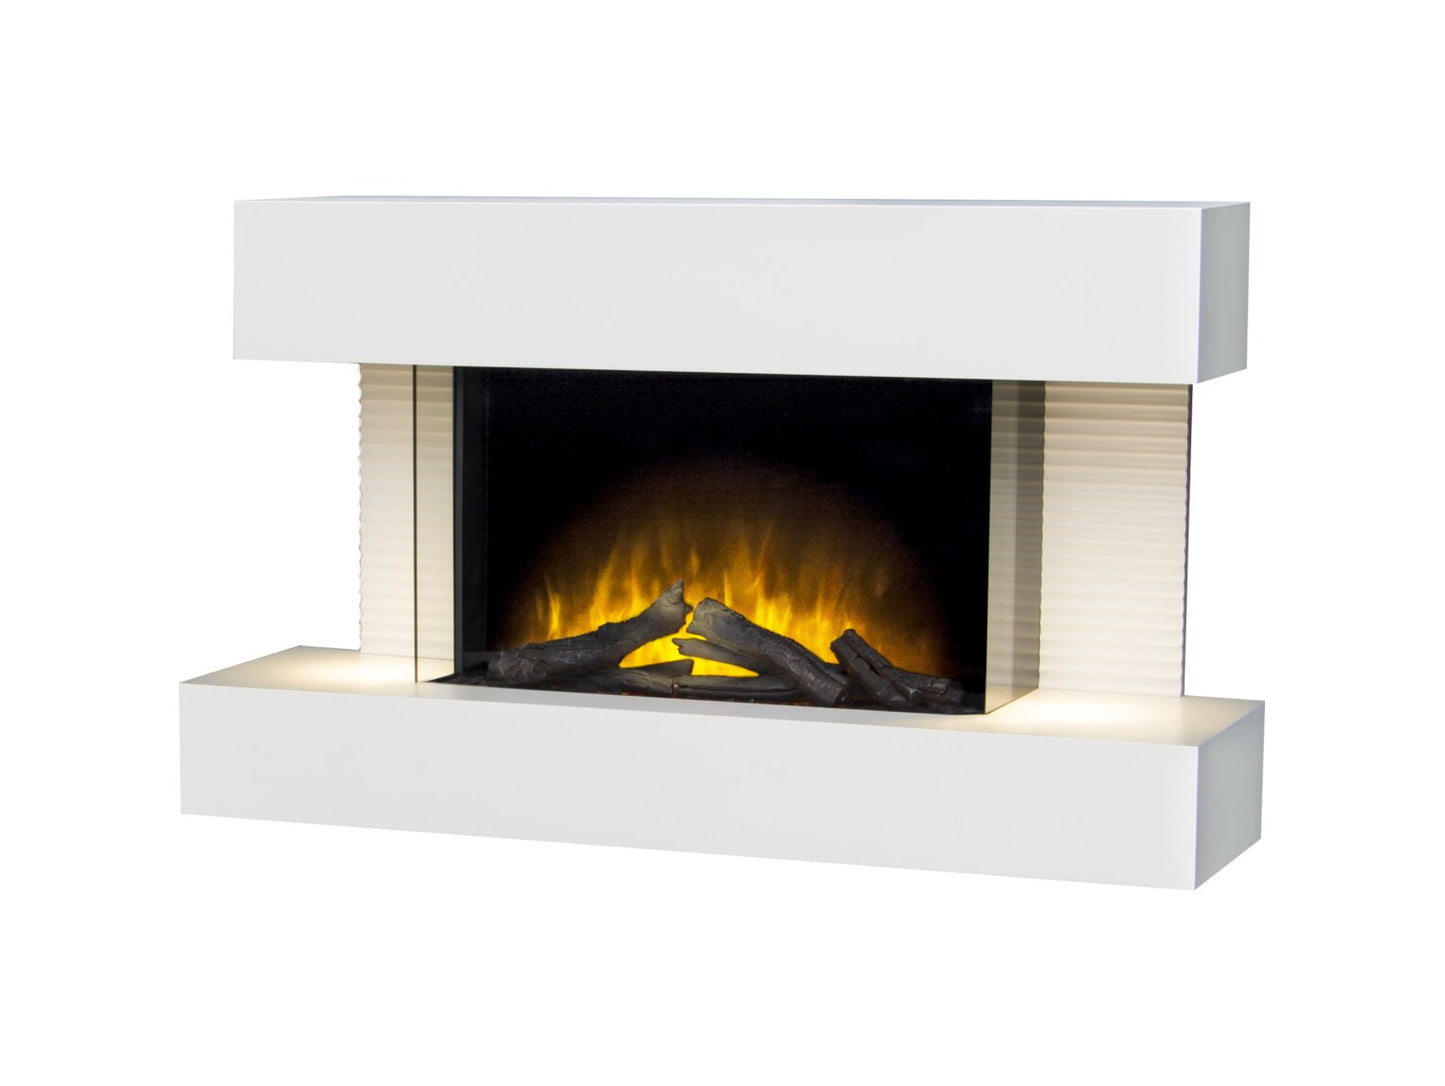 Adam Altair Wall Mounted Electric Fire Suite with Downlights & Remote Control 22768 Pure White